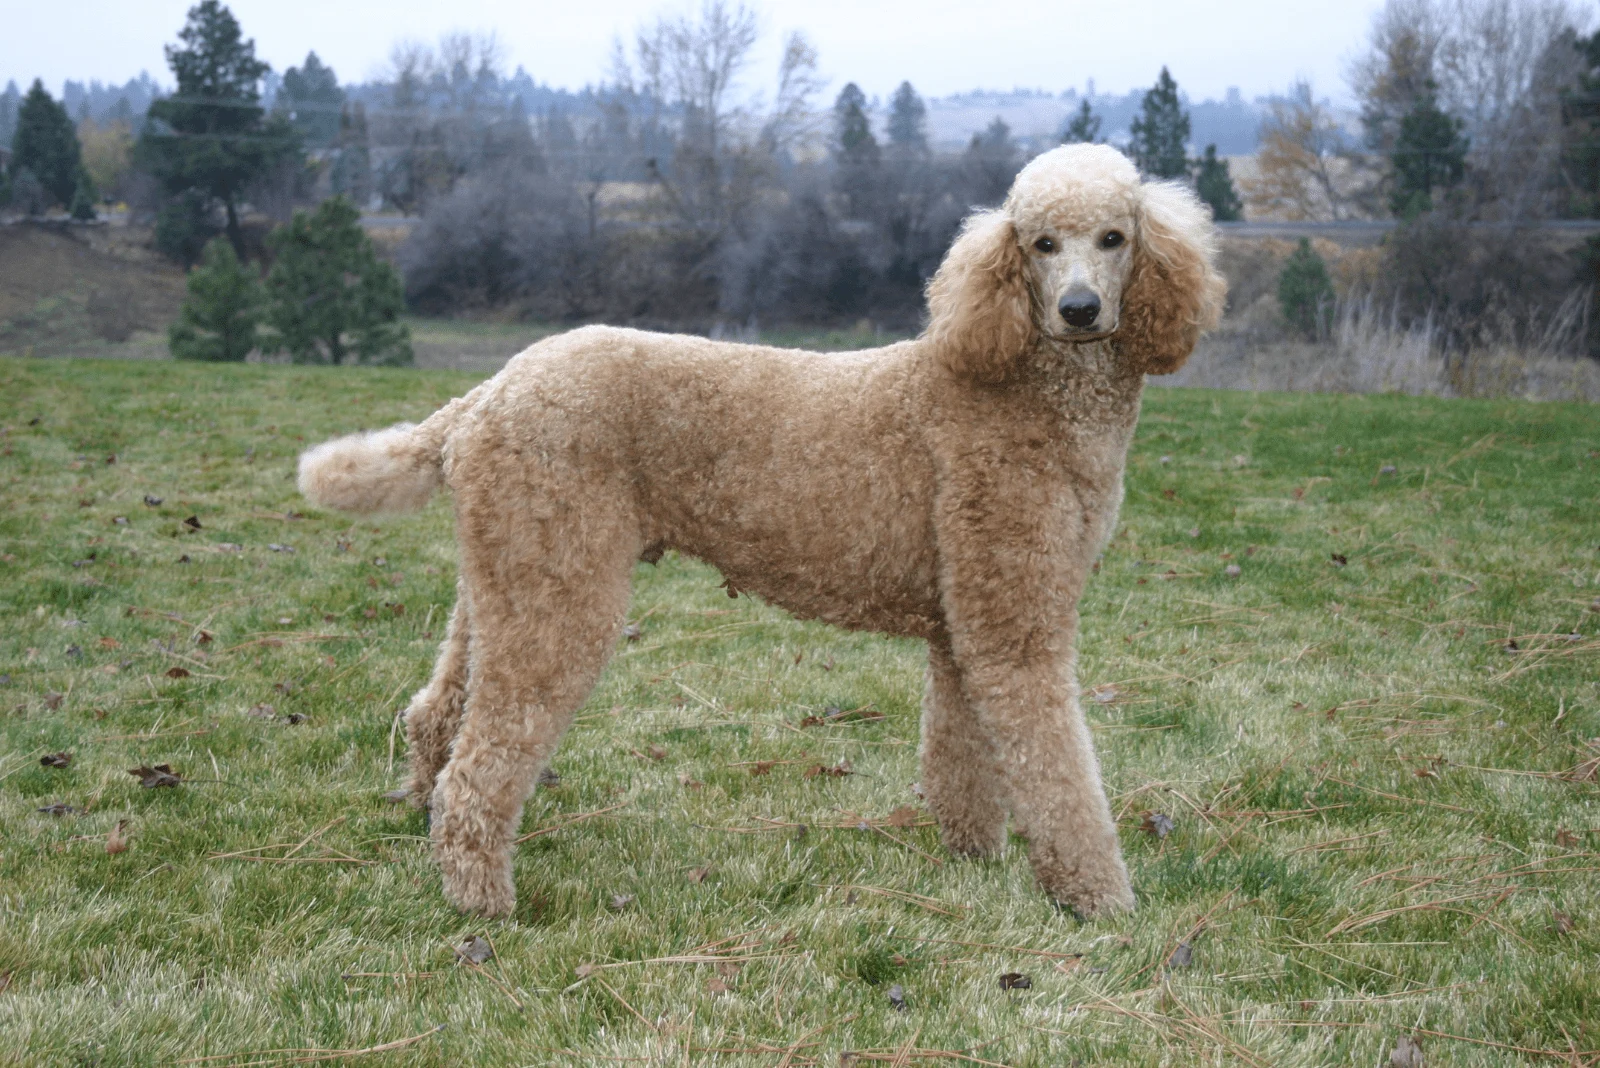 grinned Poodle walking across the field